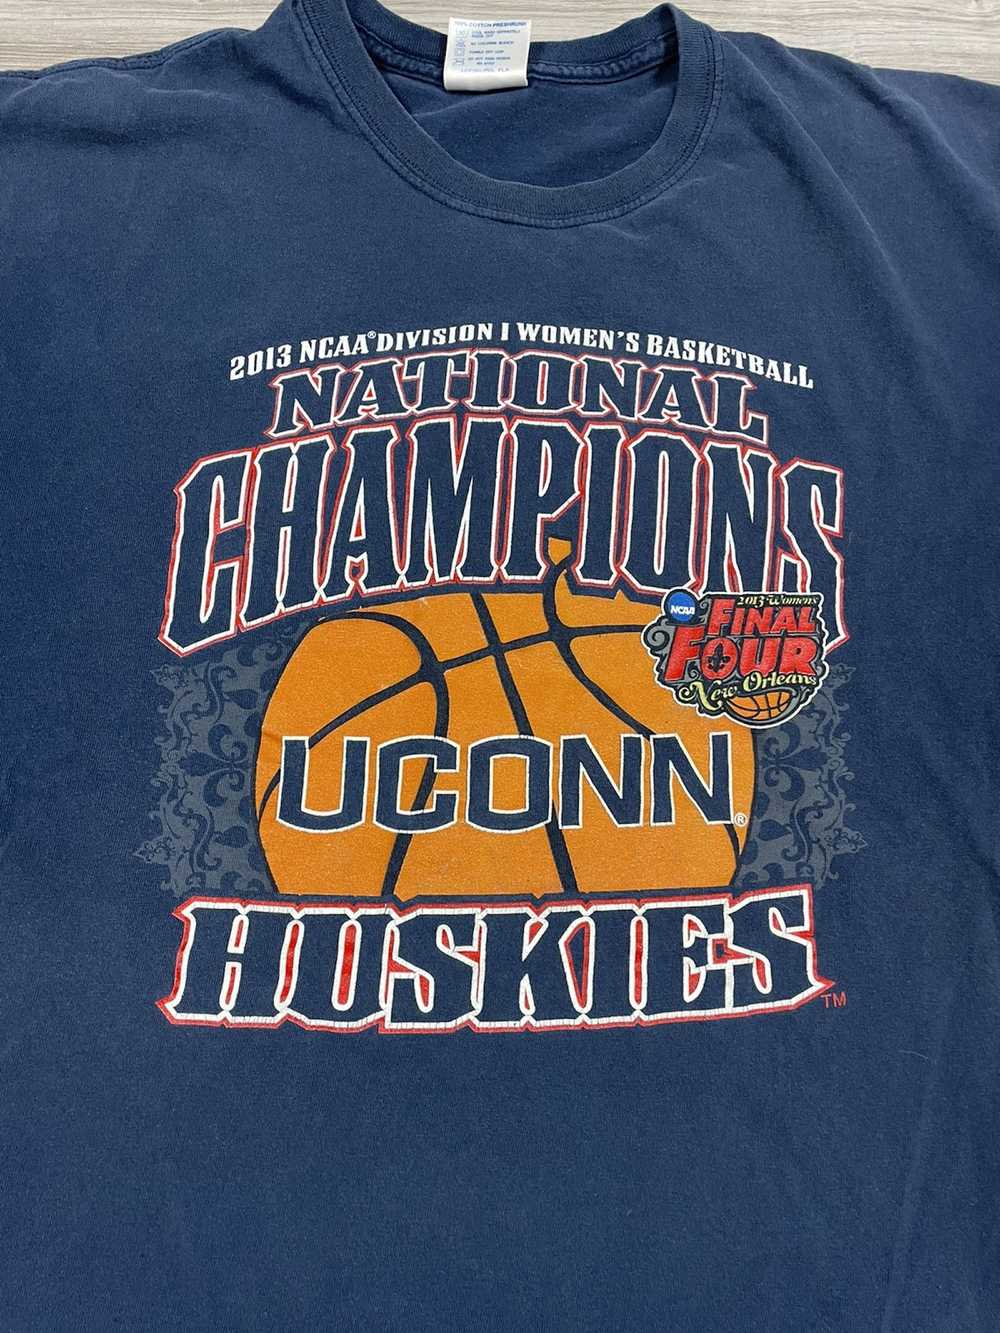 Other UConn Huskies women’s national champs shirt - image 2